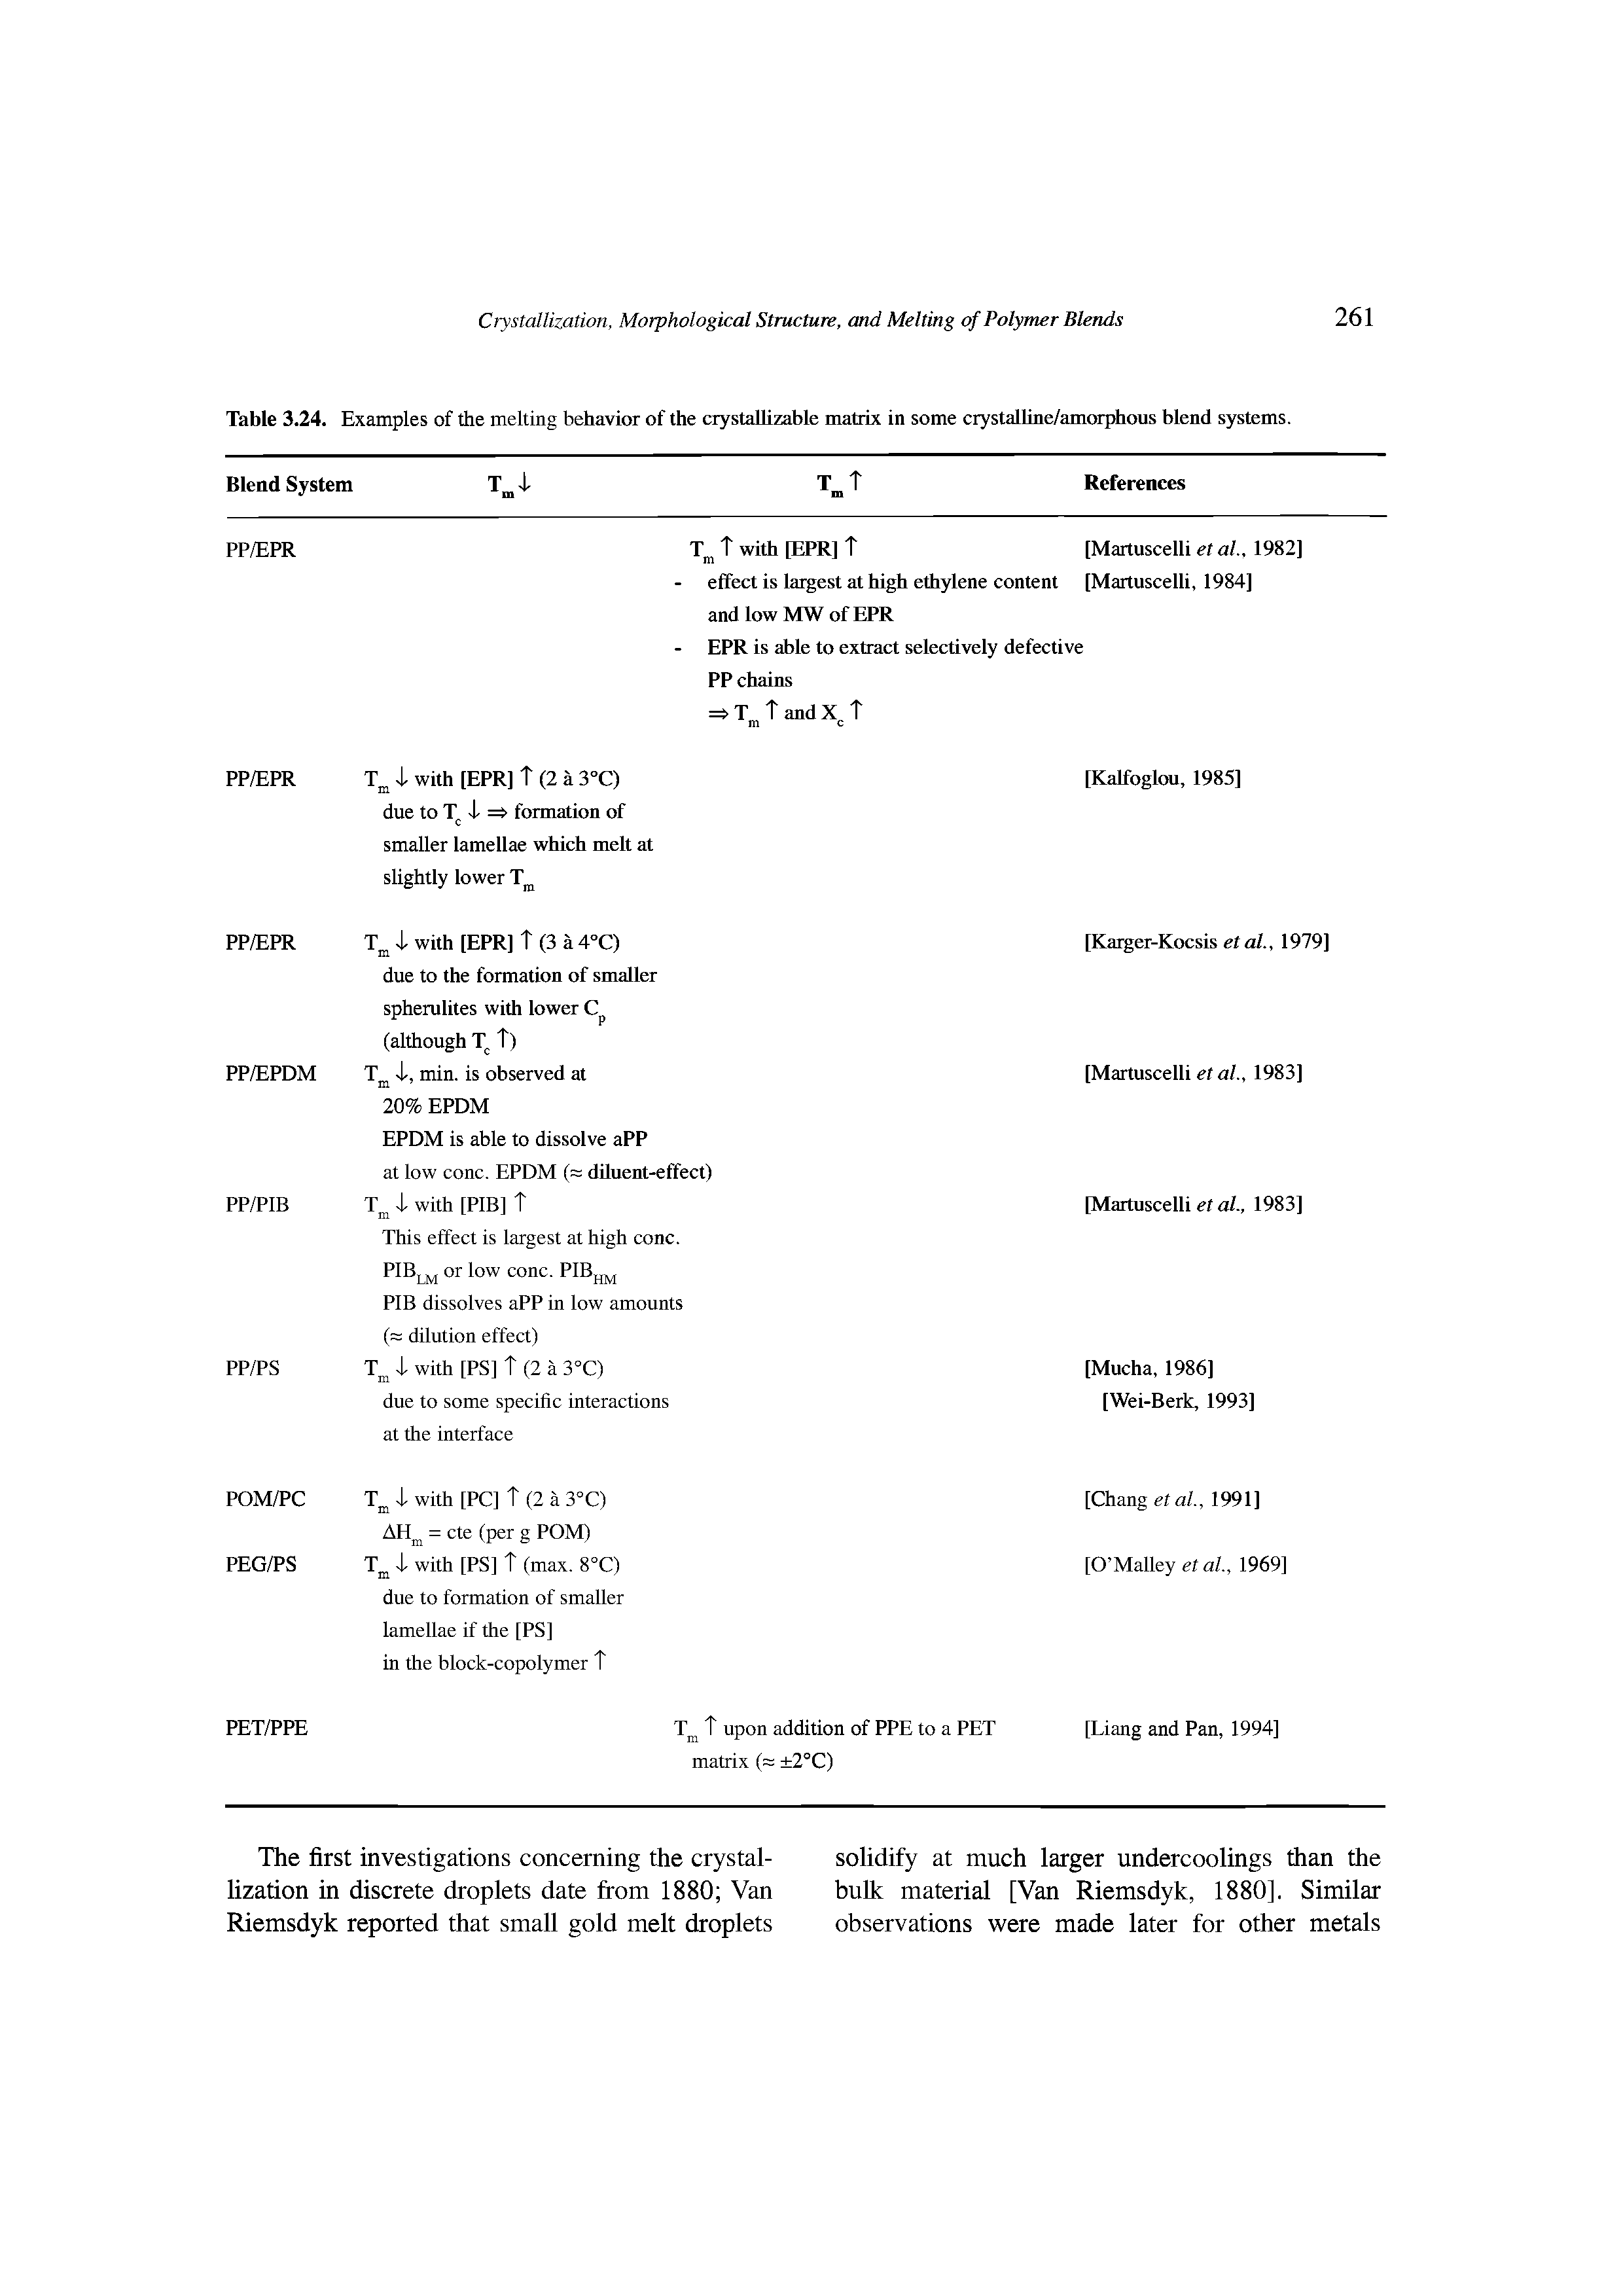 Table 3.24. Examples of the melting behavior of the ciystaUizable matrix in some crystalline/amorphous blend systems.